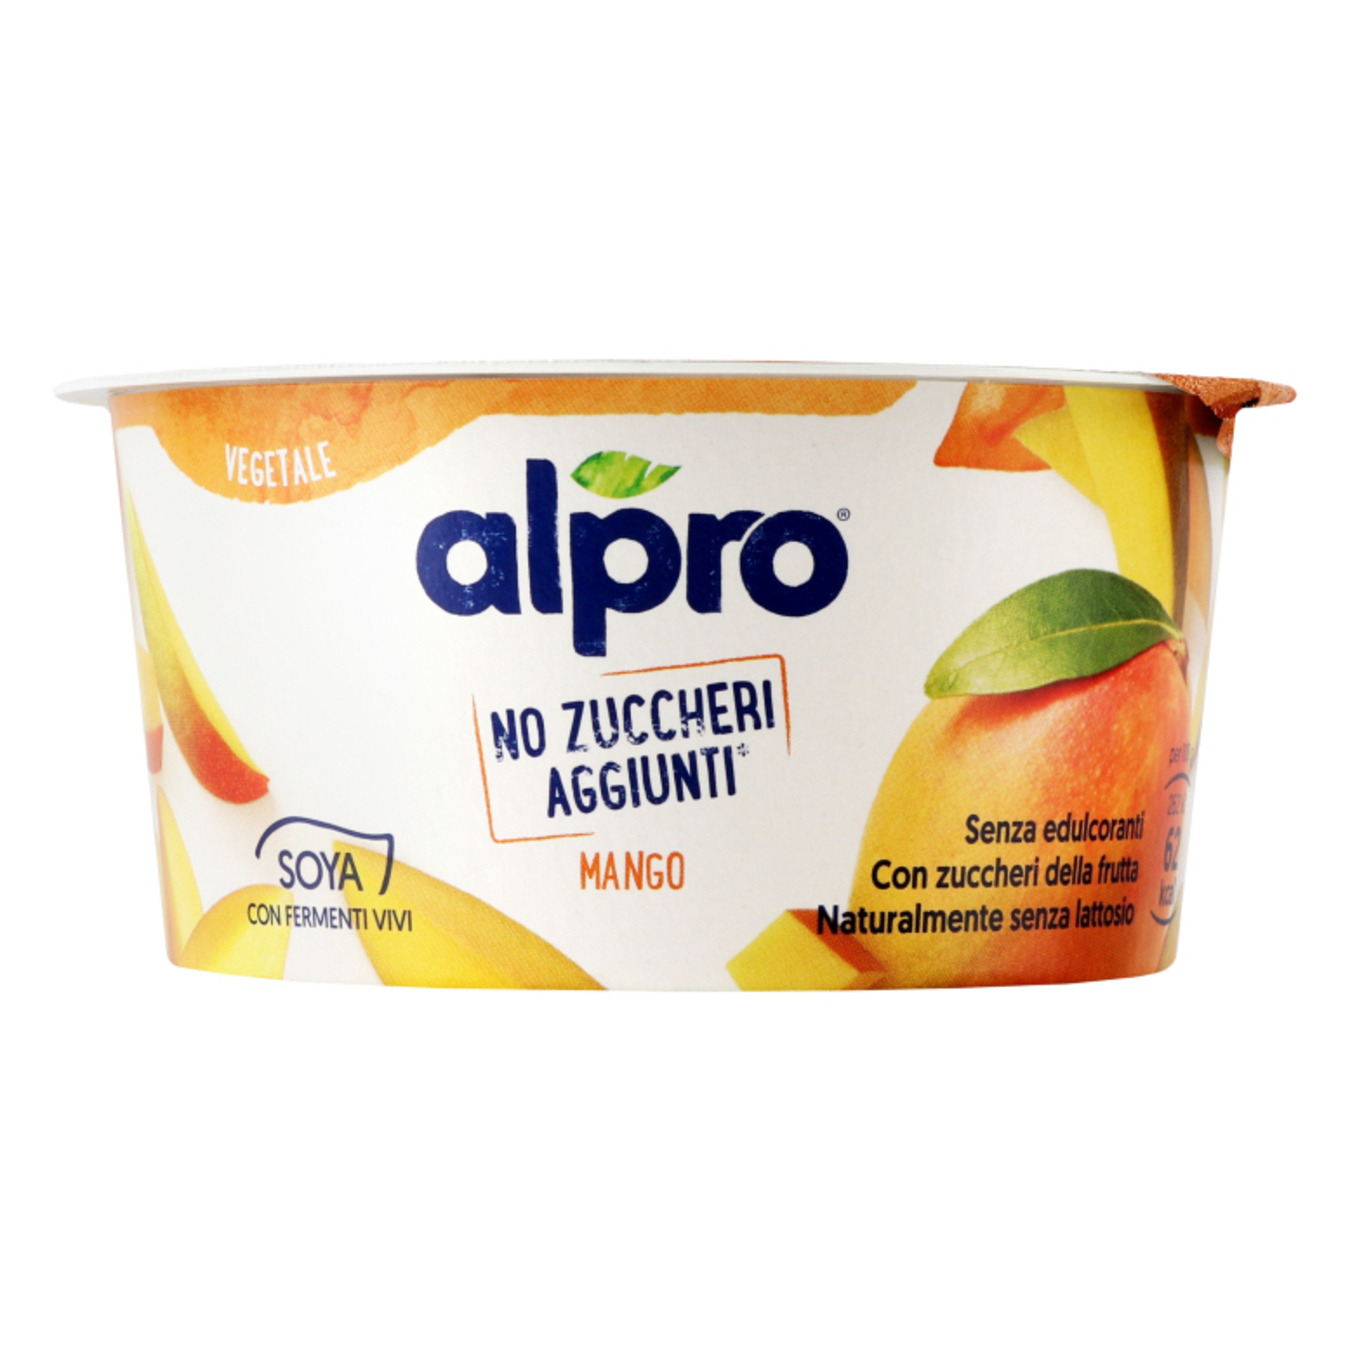 Product Alpro soy fermented without sugar mango glass 2% 135g